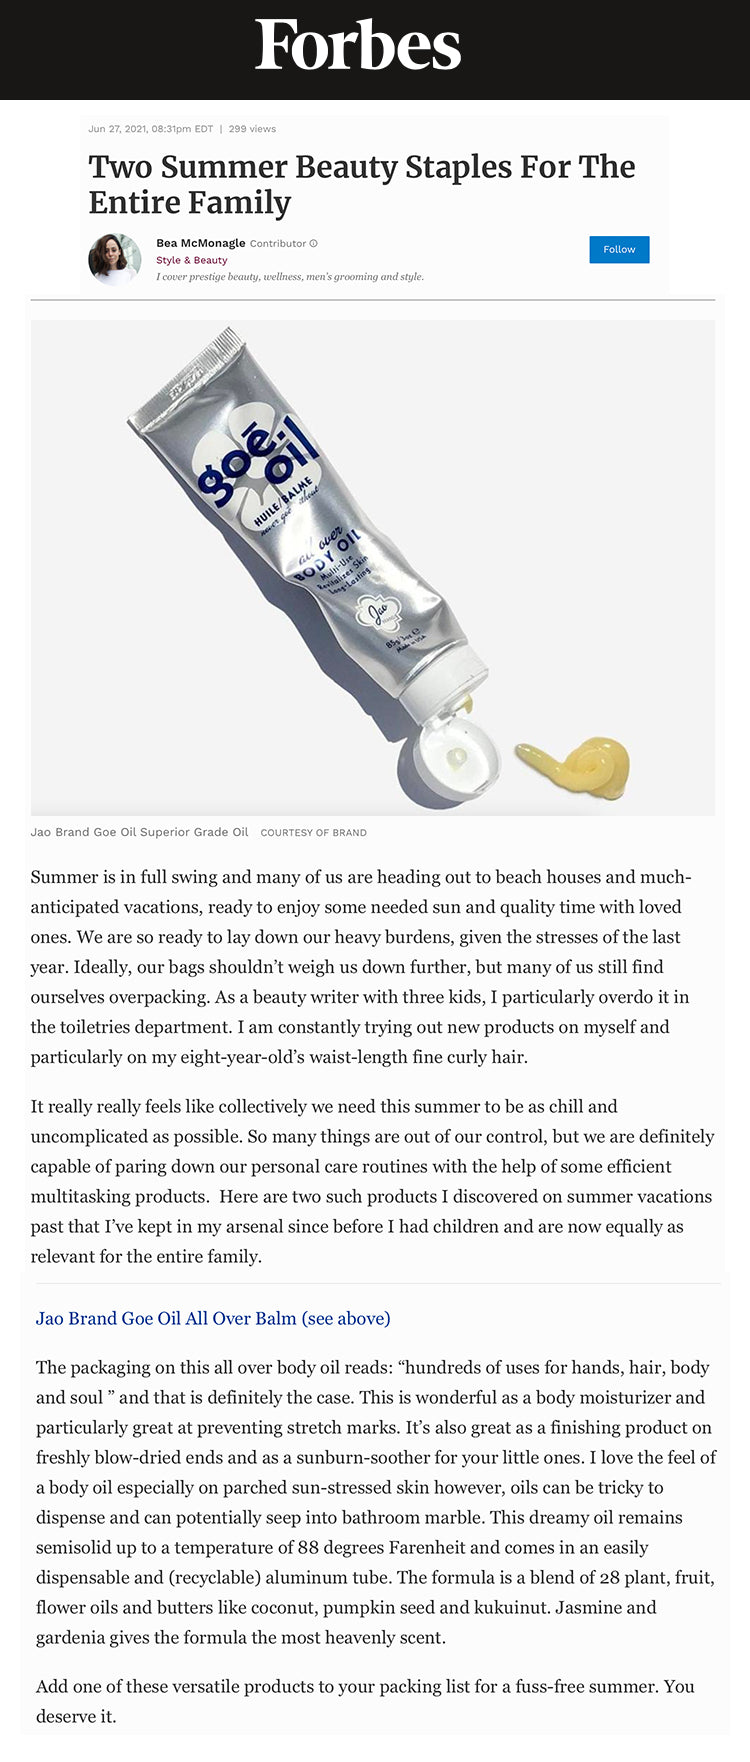 Forbes: Two Summer Beauty Staples For The Entire Family Goe Oil